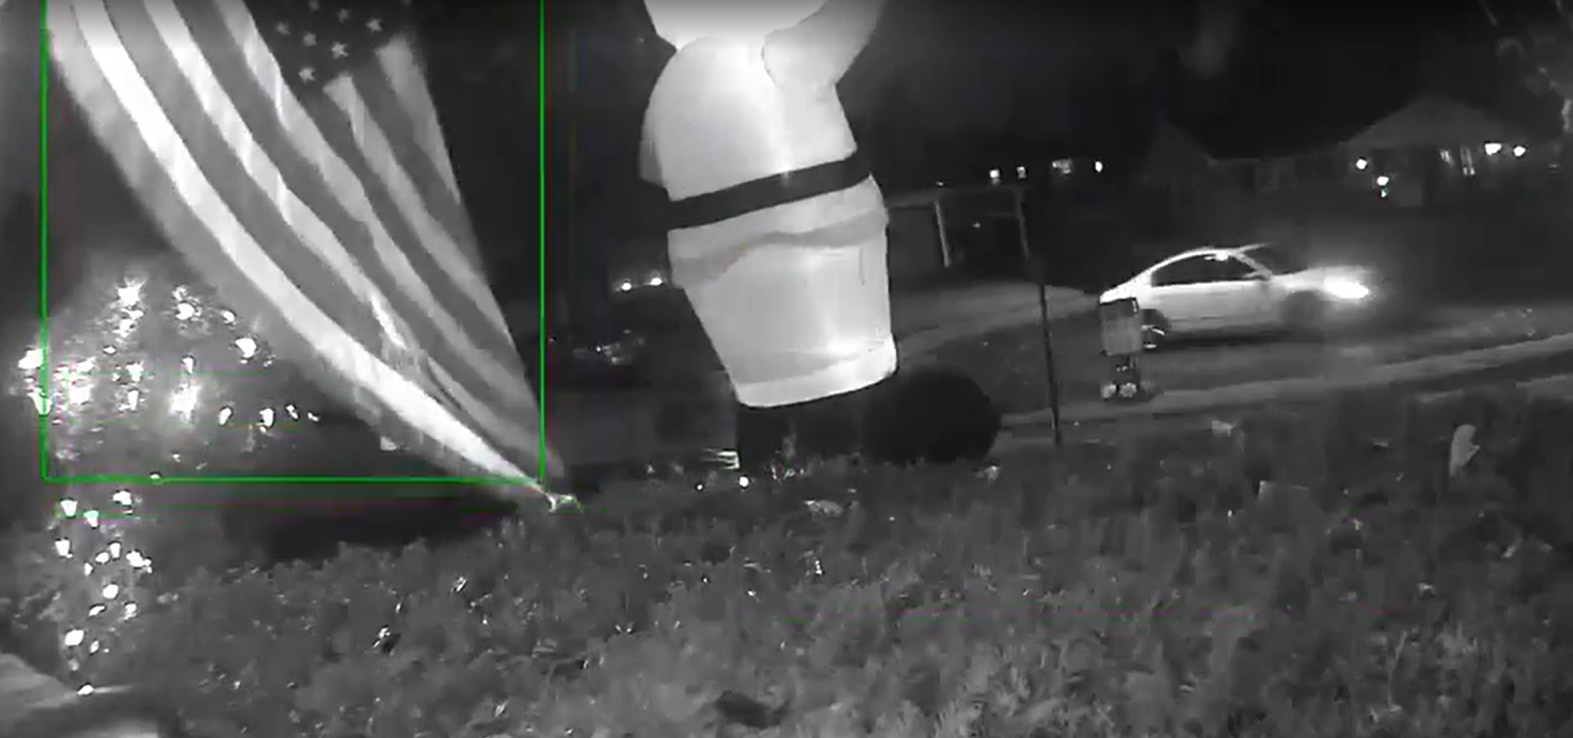 Mr Nelson’s security footage captured the moment Santa was supposedly shot